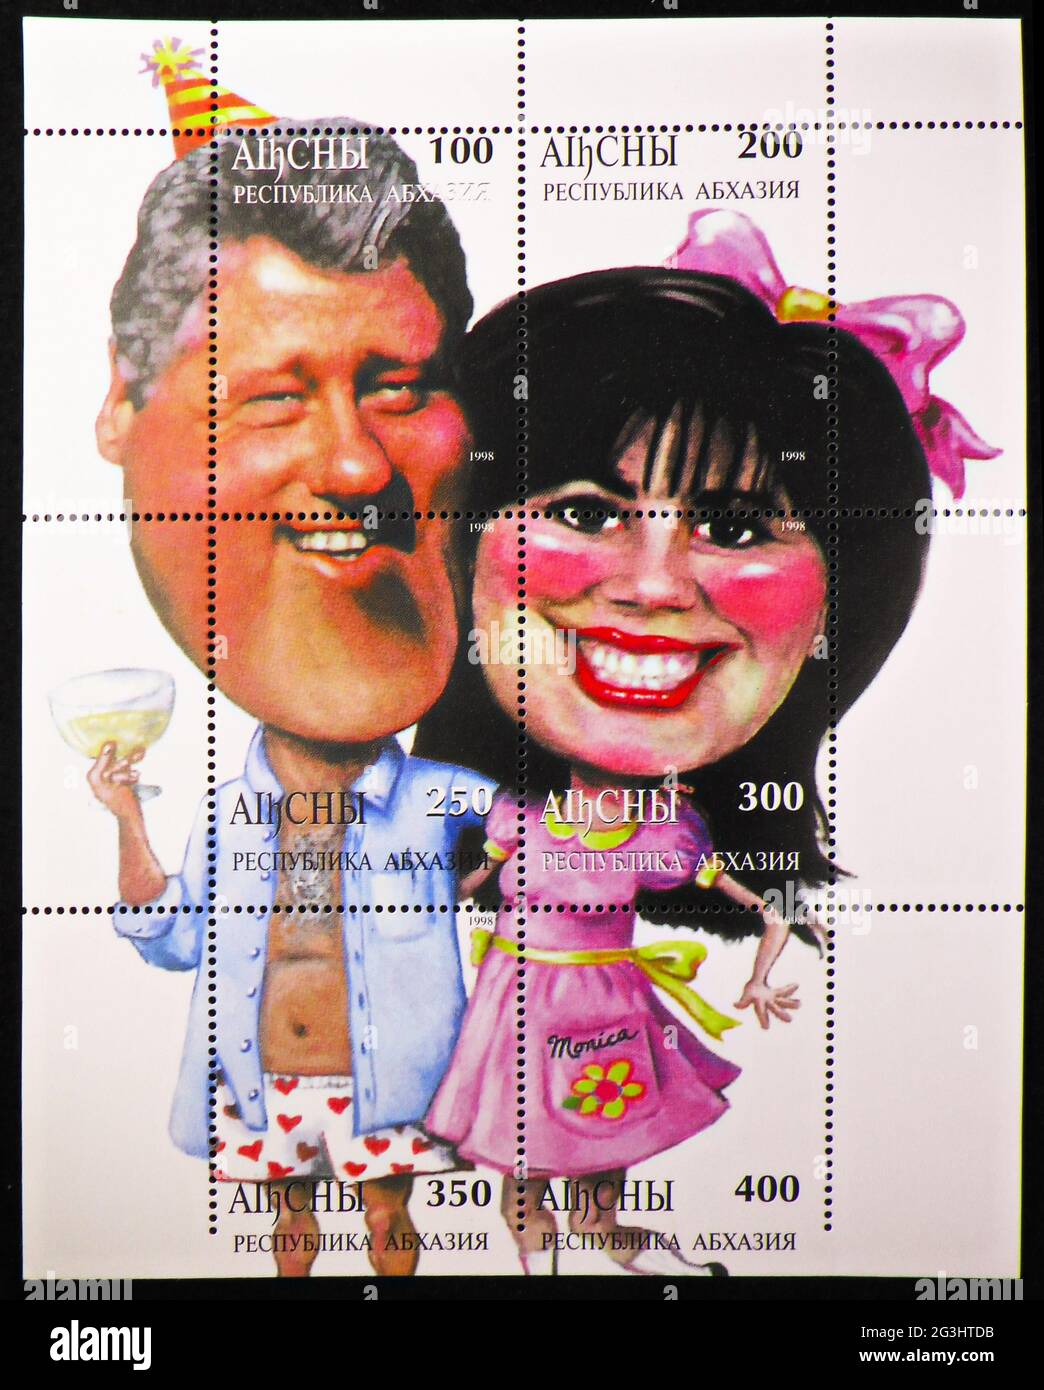 Bill Clinton and Monica Lewinsky in Oval Office 8x10 Photo #A35 